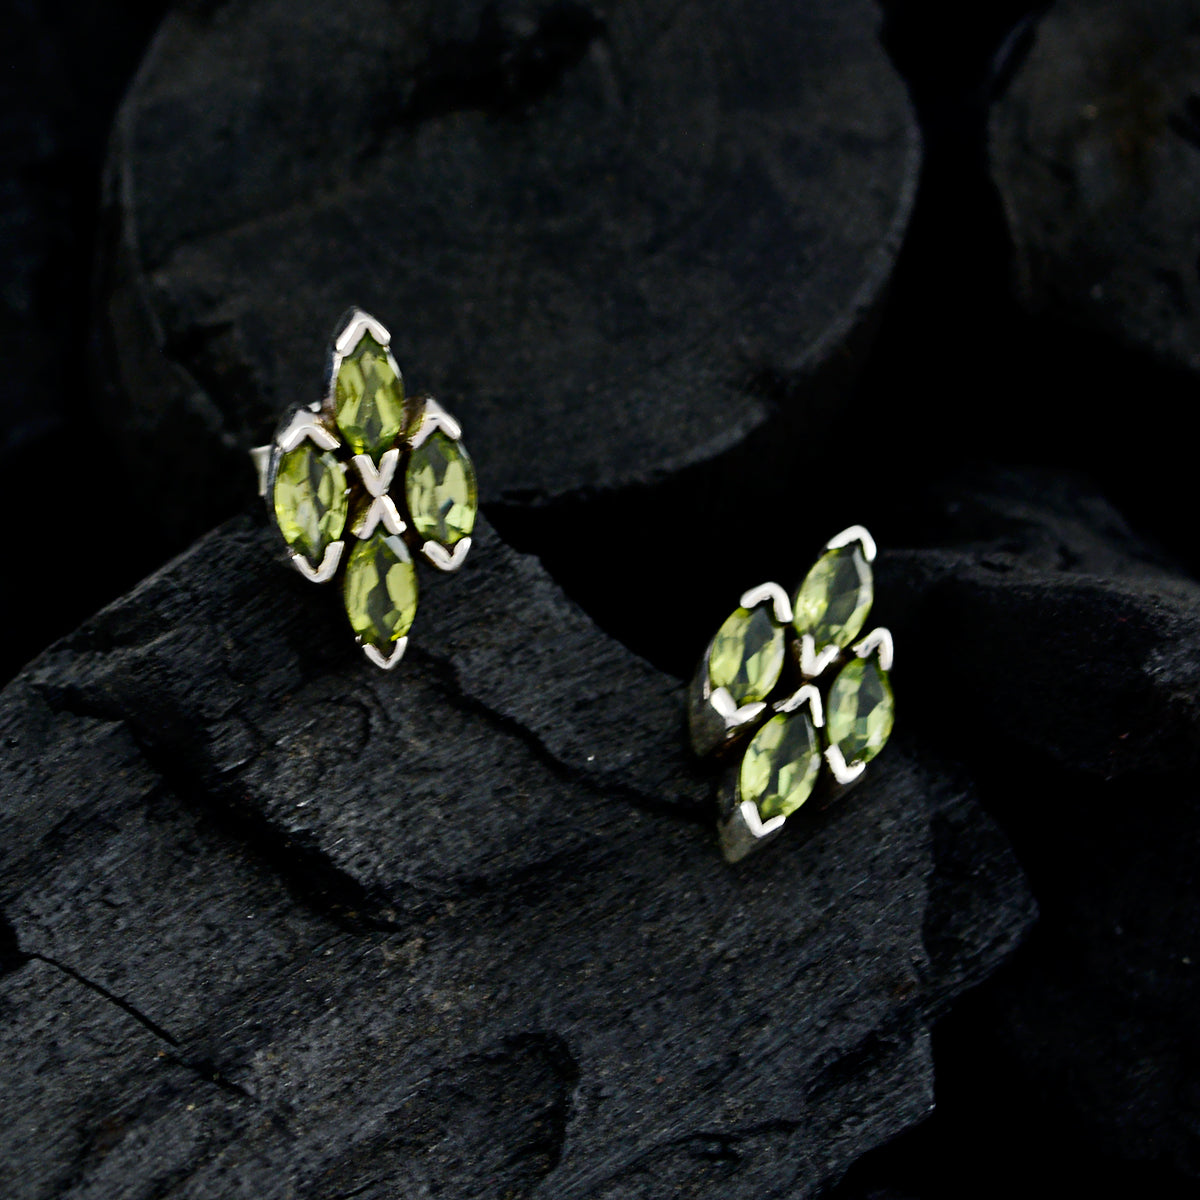 Riyo Real Gemstones Marquise Faceted Green Peridot Silver Earrings gift for valentine's day